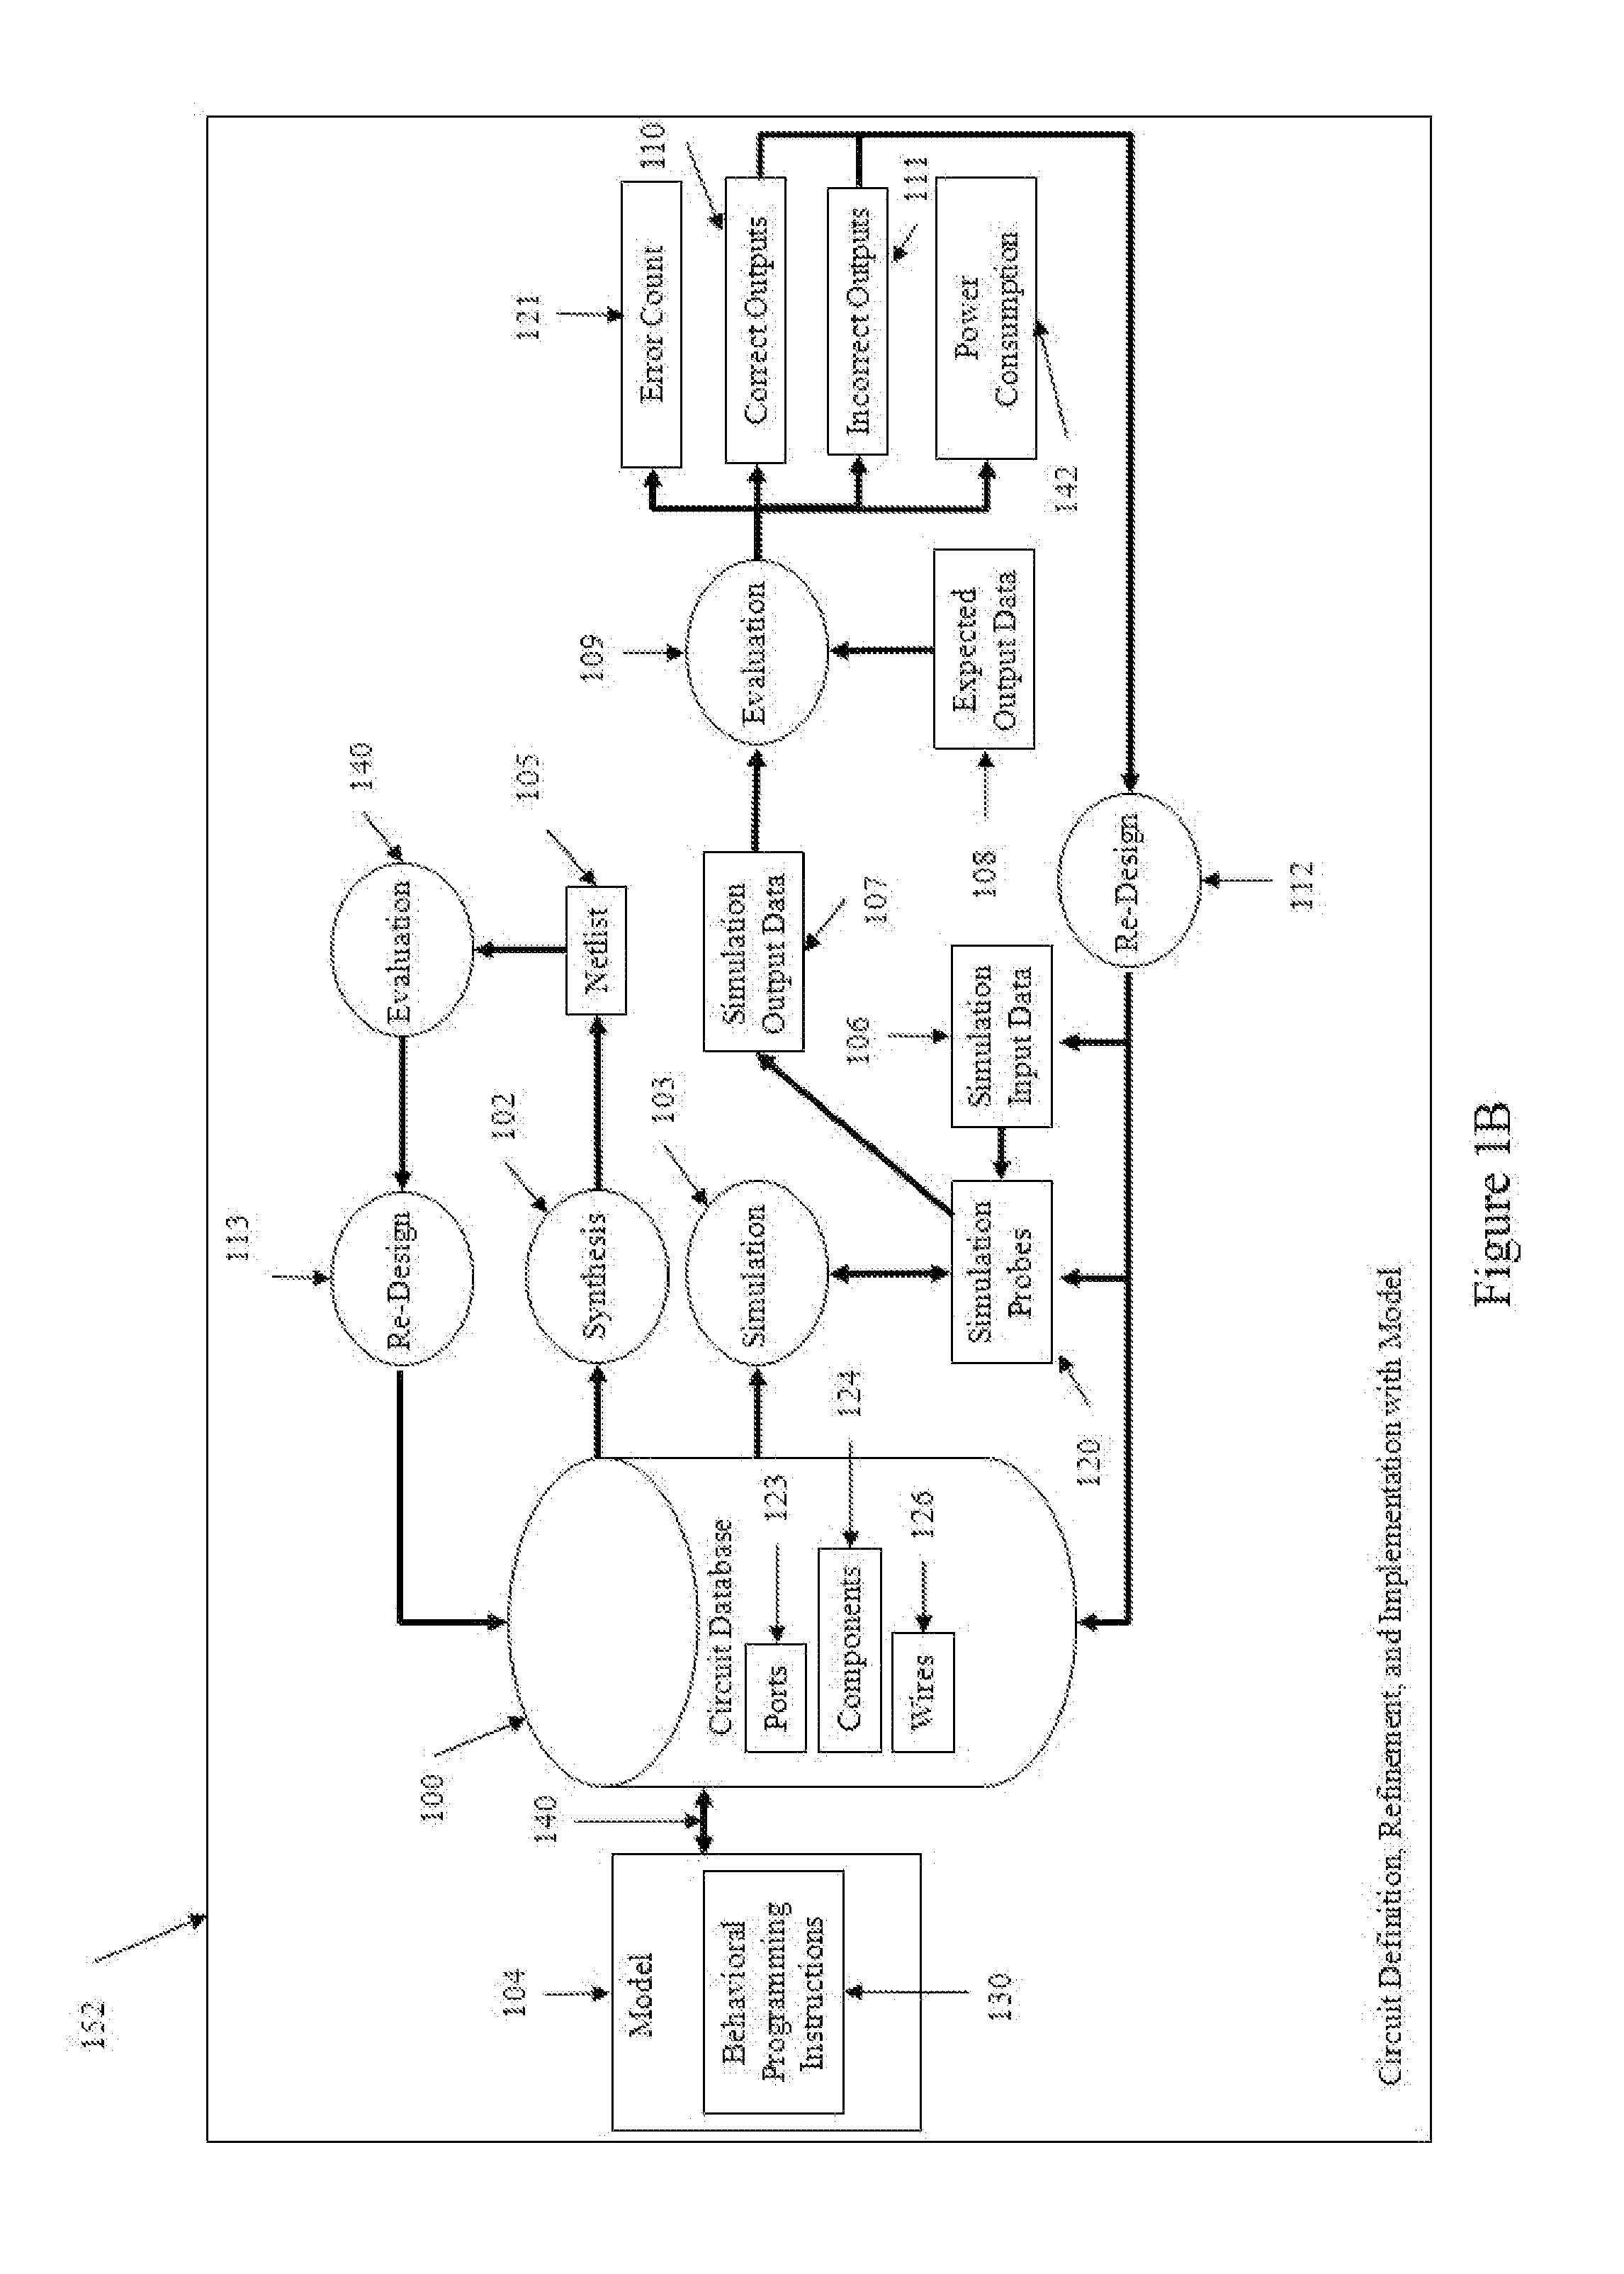 Systems and methods for circuit design, synthesis, simulation, and modeling